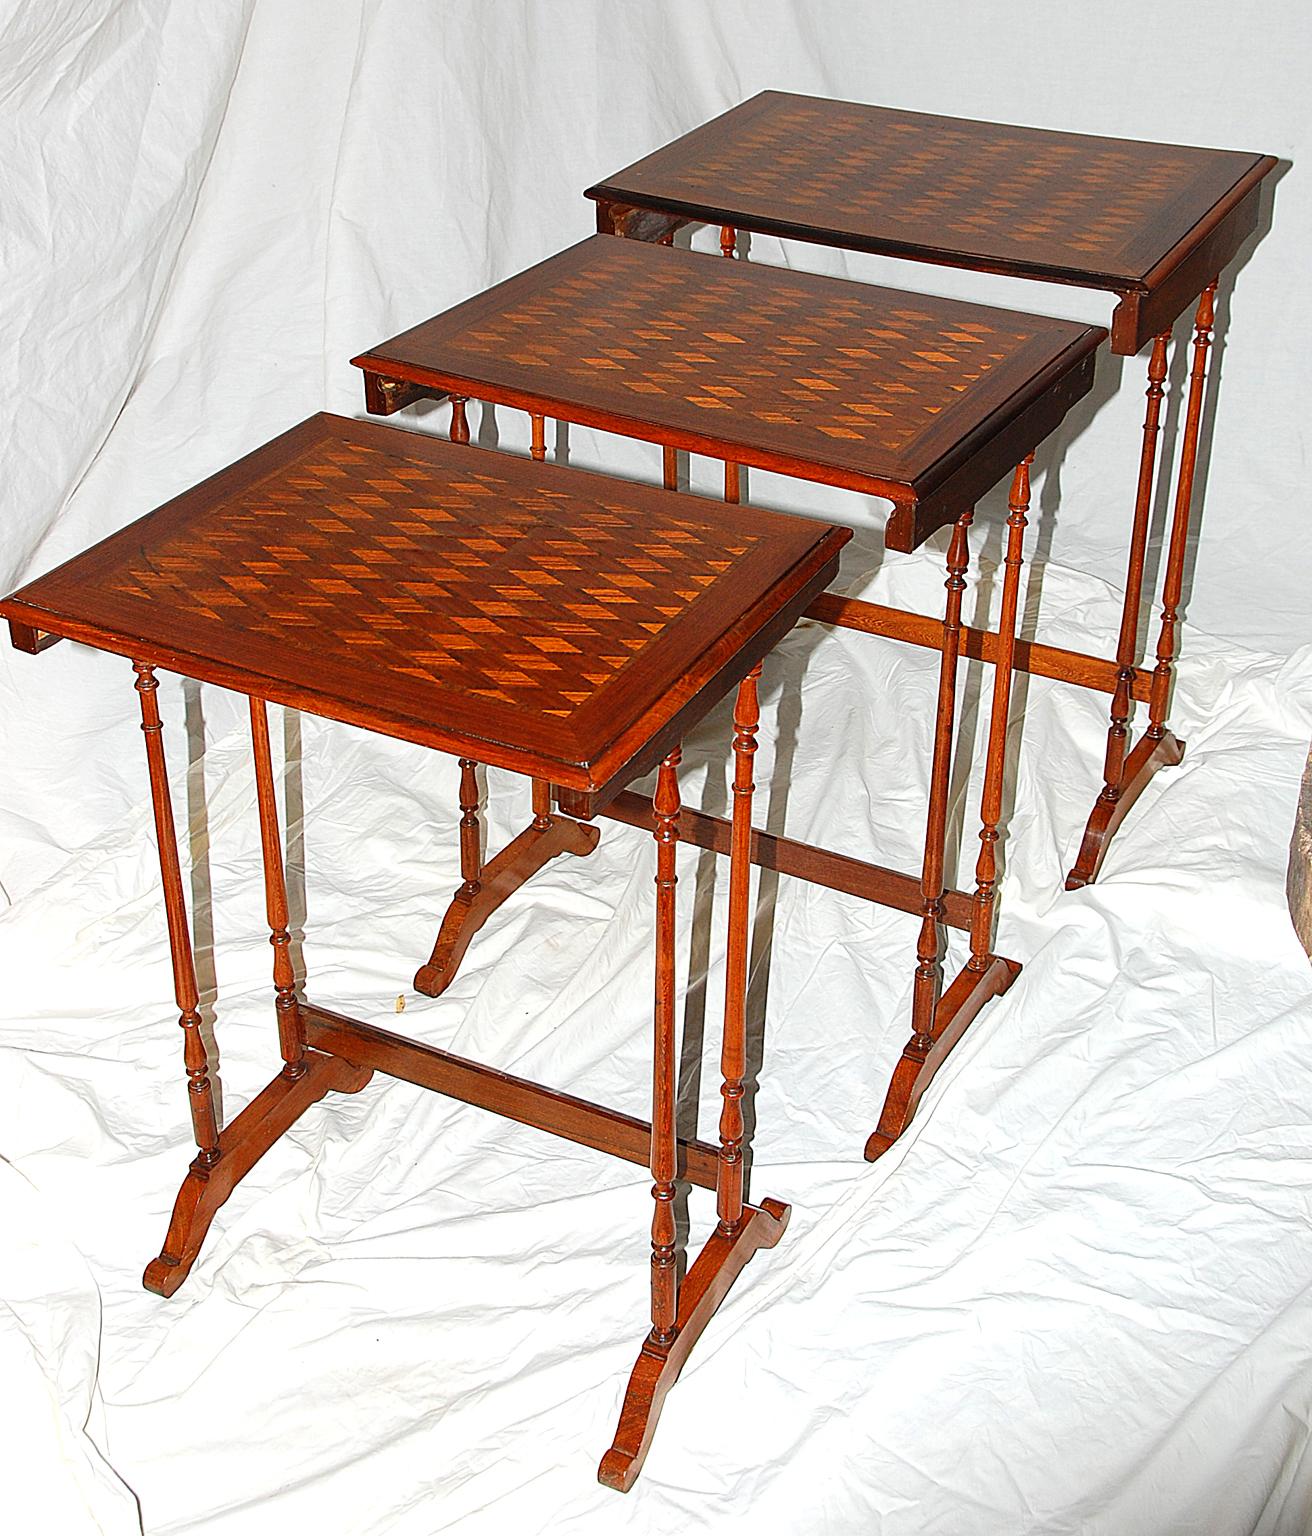 French set of three 19th century walnut marquetry nesting tables with various inlaid woods to the top and delicate turned tapered legs, curved cross stretchers, late 19th century.